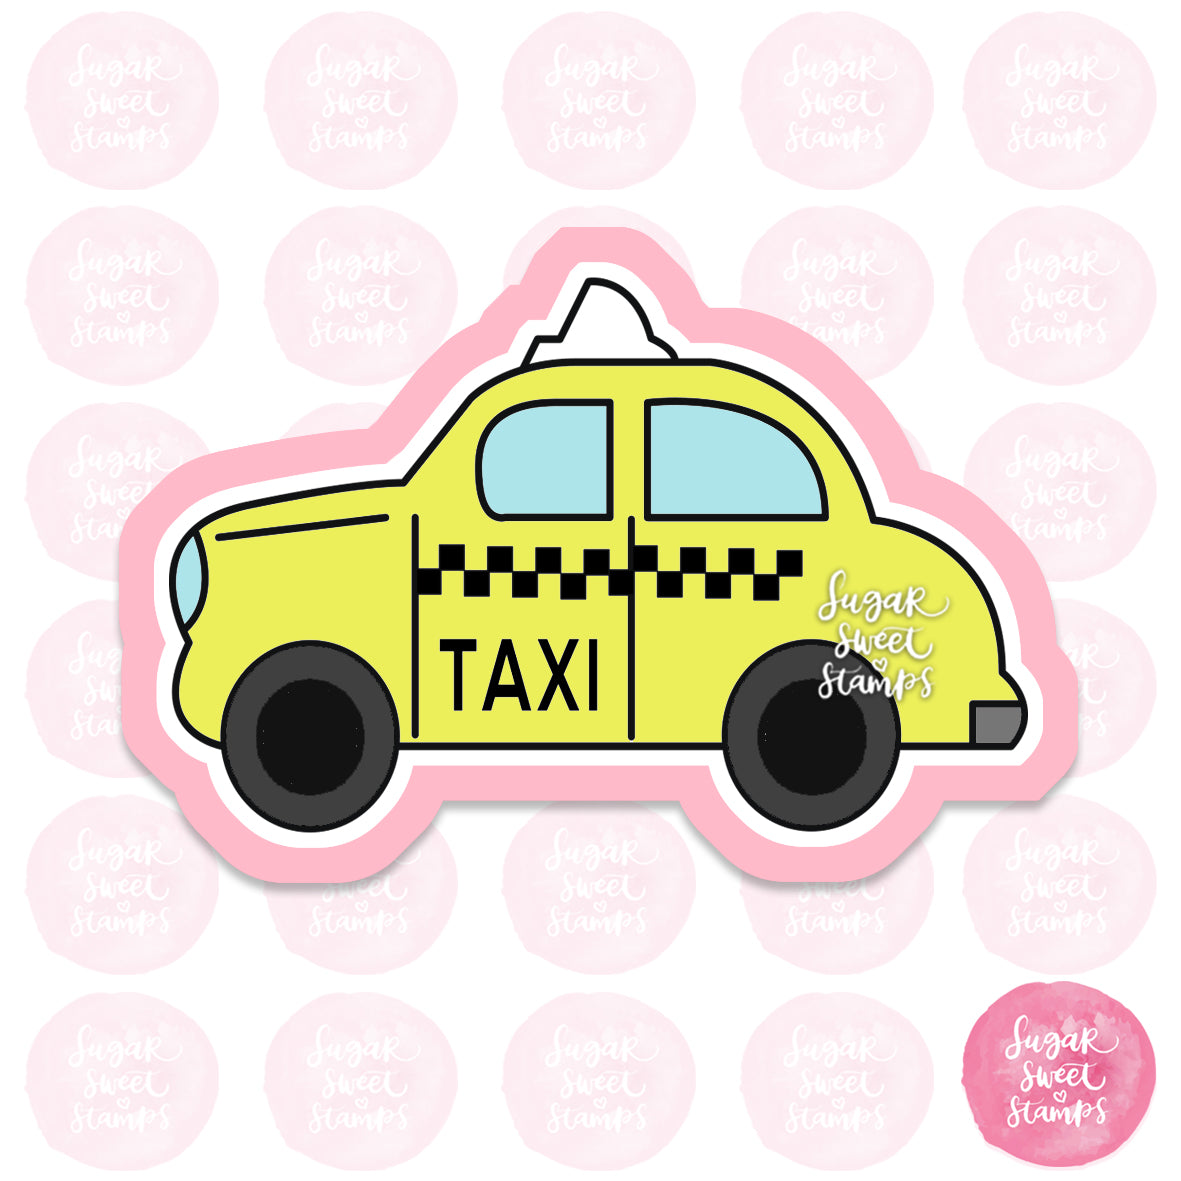 yellow taxi cab public transport car vehicle custom 3d printed cookie cutter